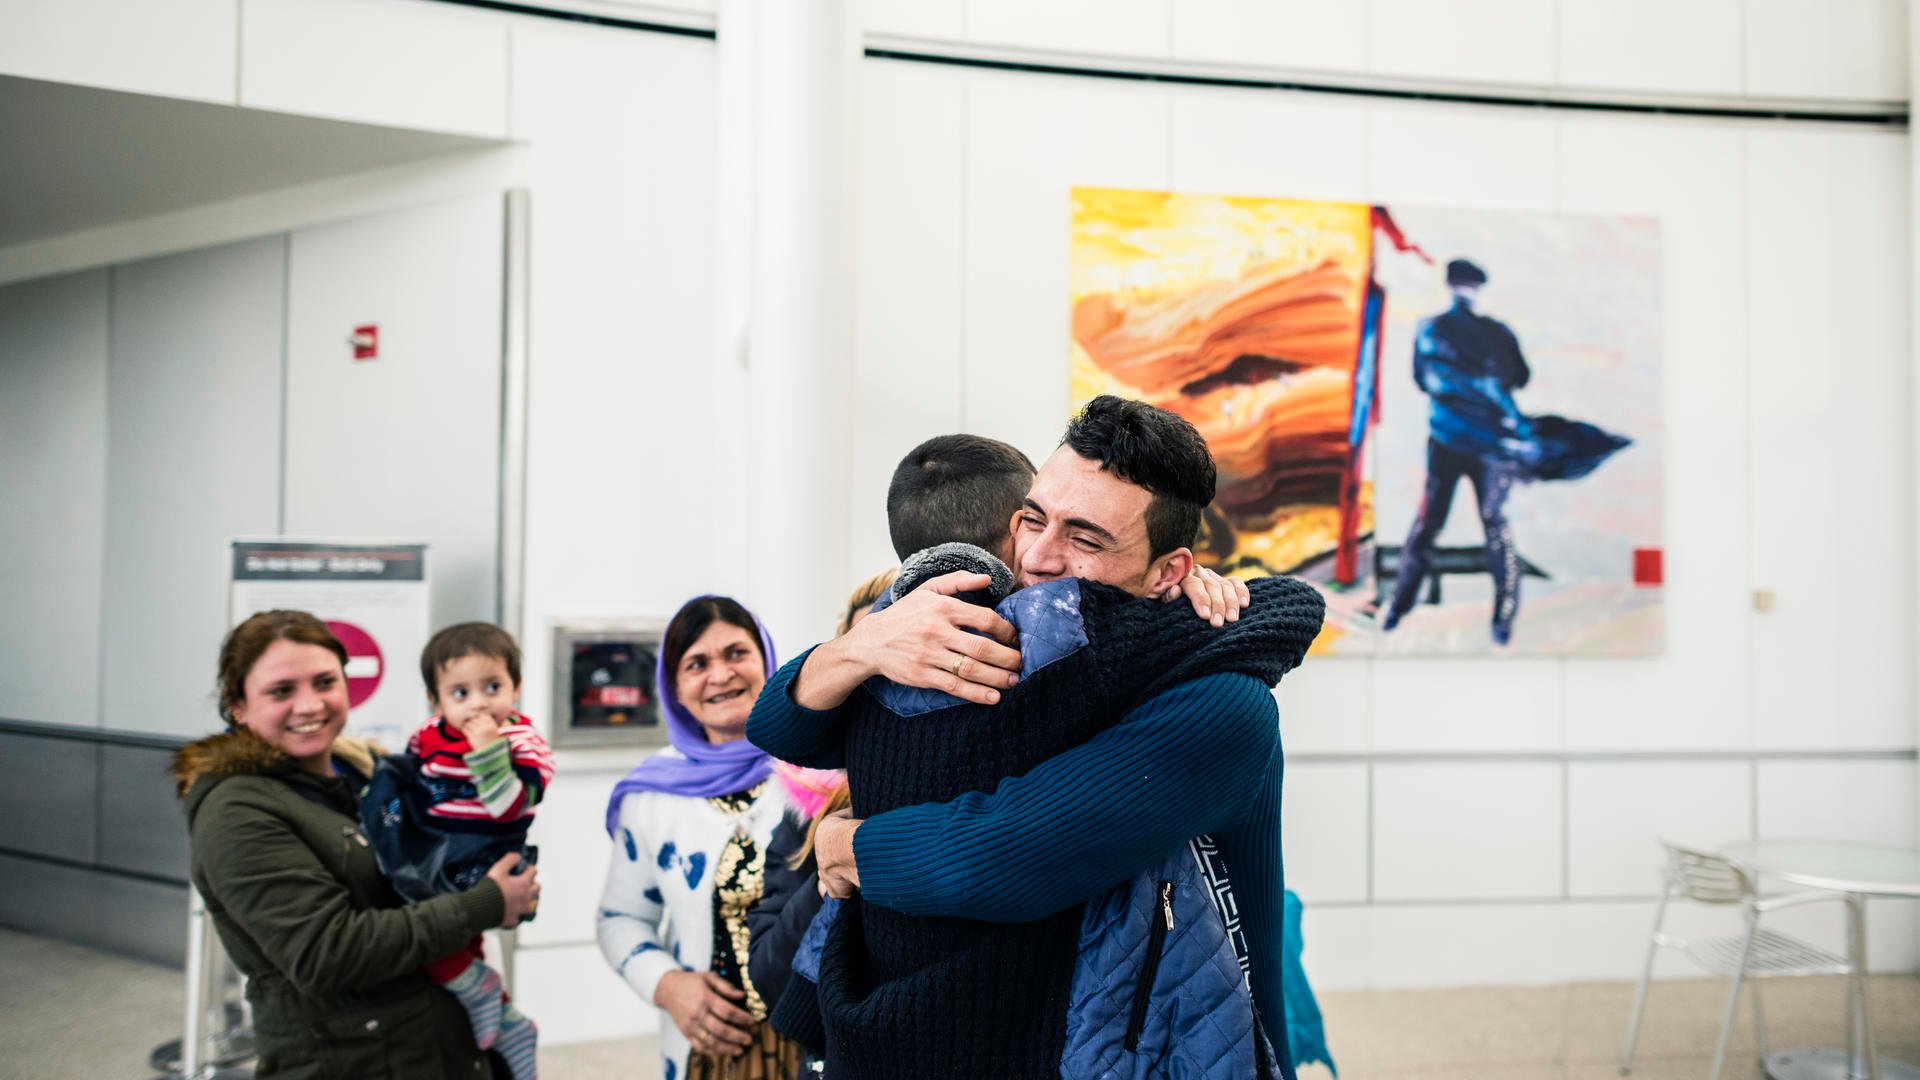 Adil Nimr, a refugee from Iraq who escaped ISIS, was reunited with 13 family members in Seattle on Feb. 10 after President Trump’s travel ban was blocked. 